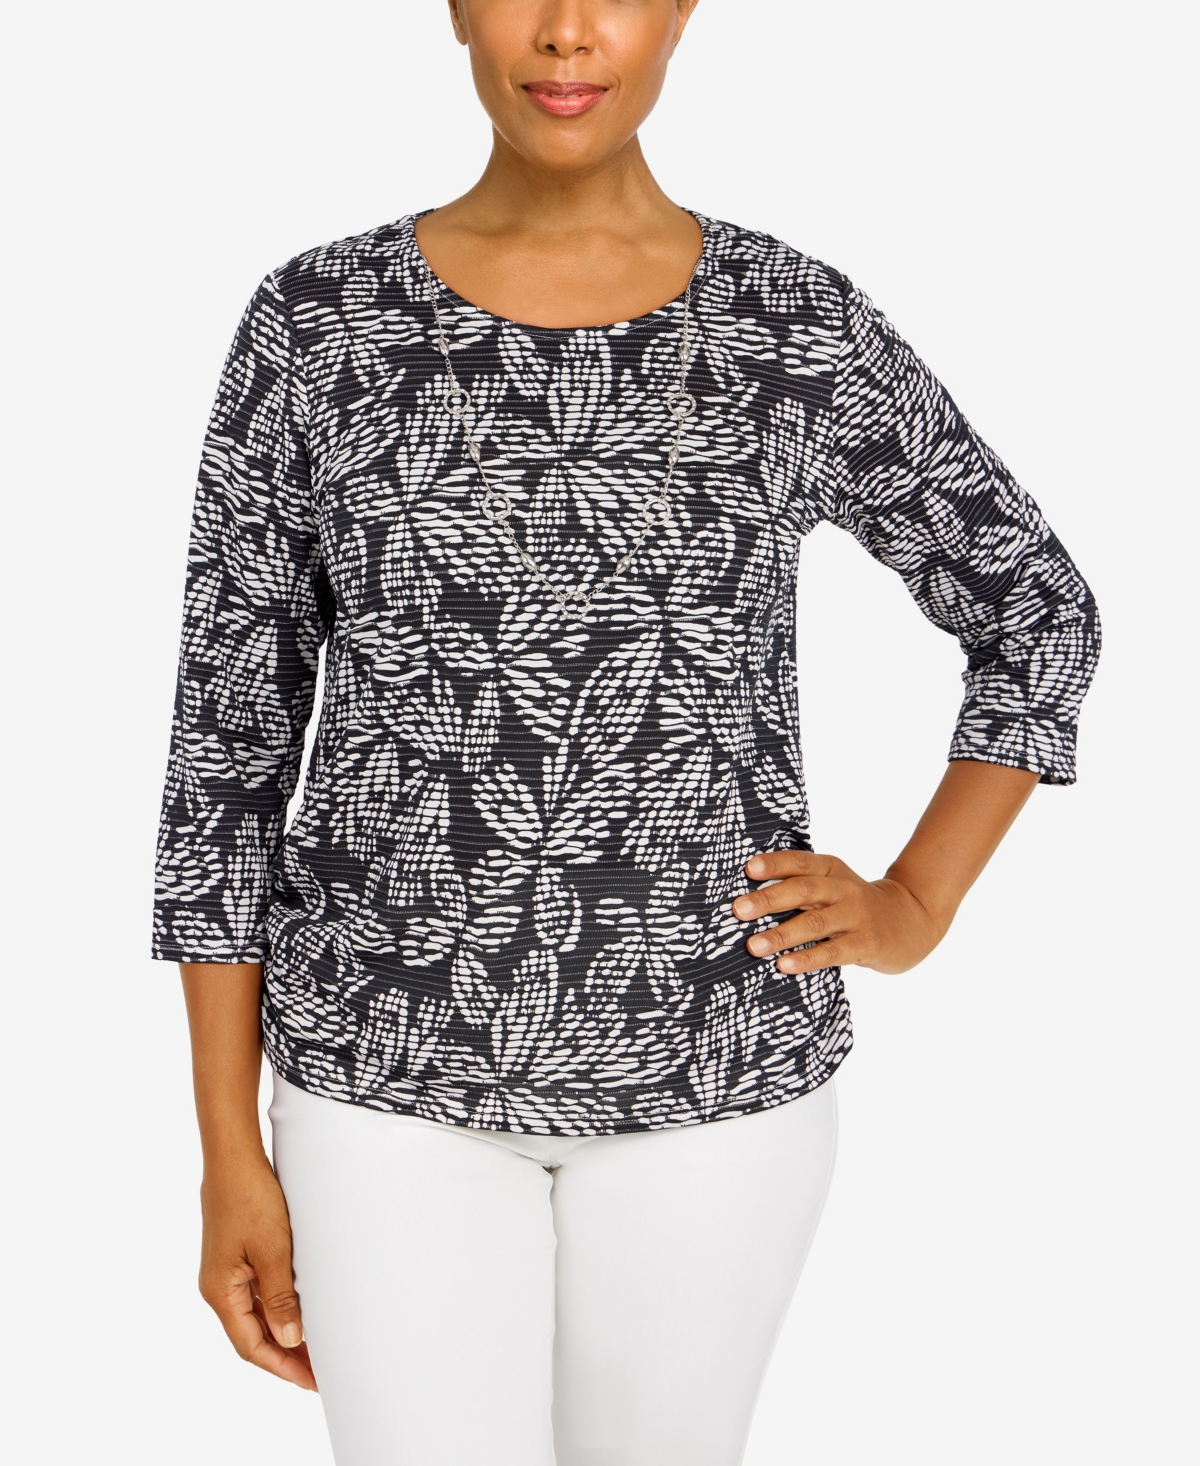 ALFRED DUNNER PETITE CLASSICS FLORAL JACQUARD BUTTERFLY KNIT TOP WITH NECKLACE